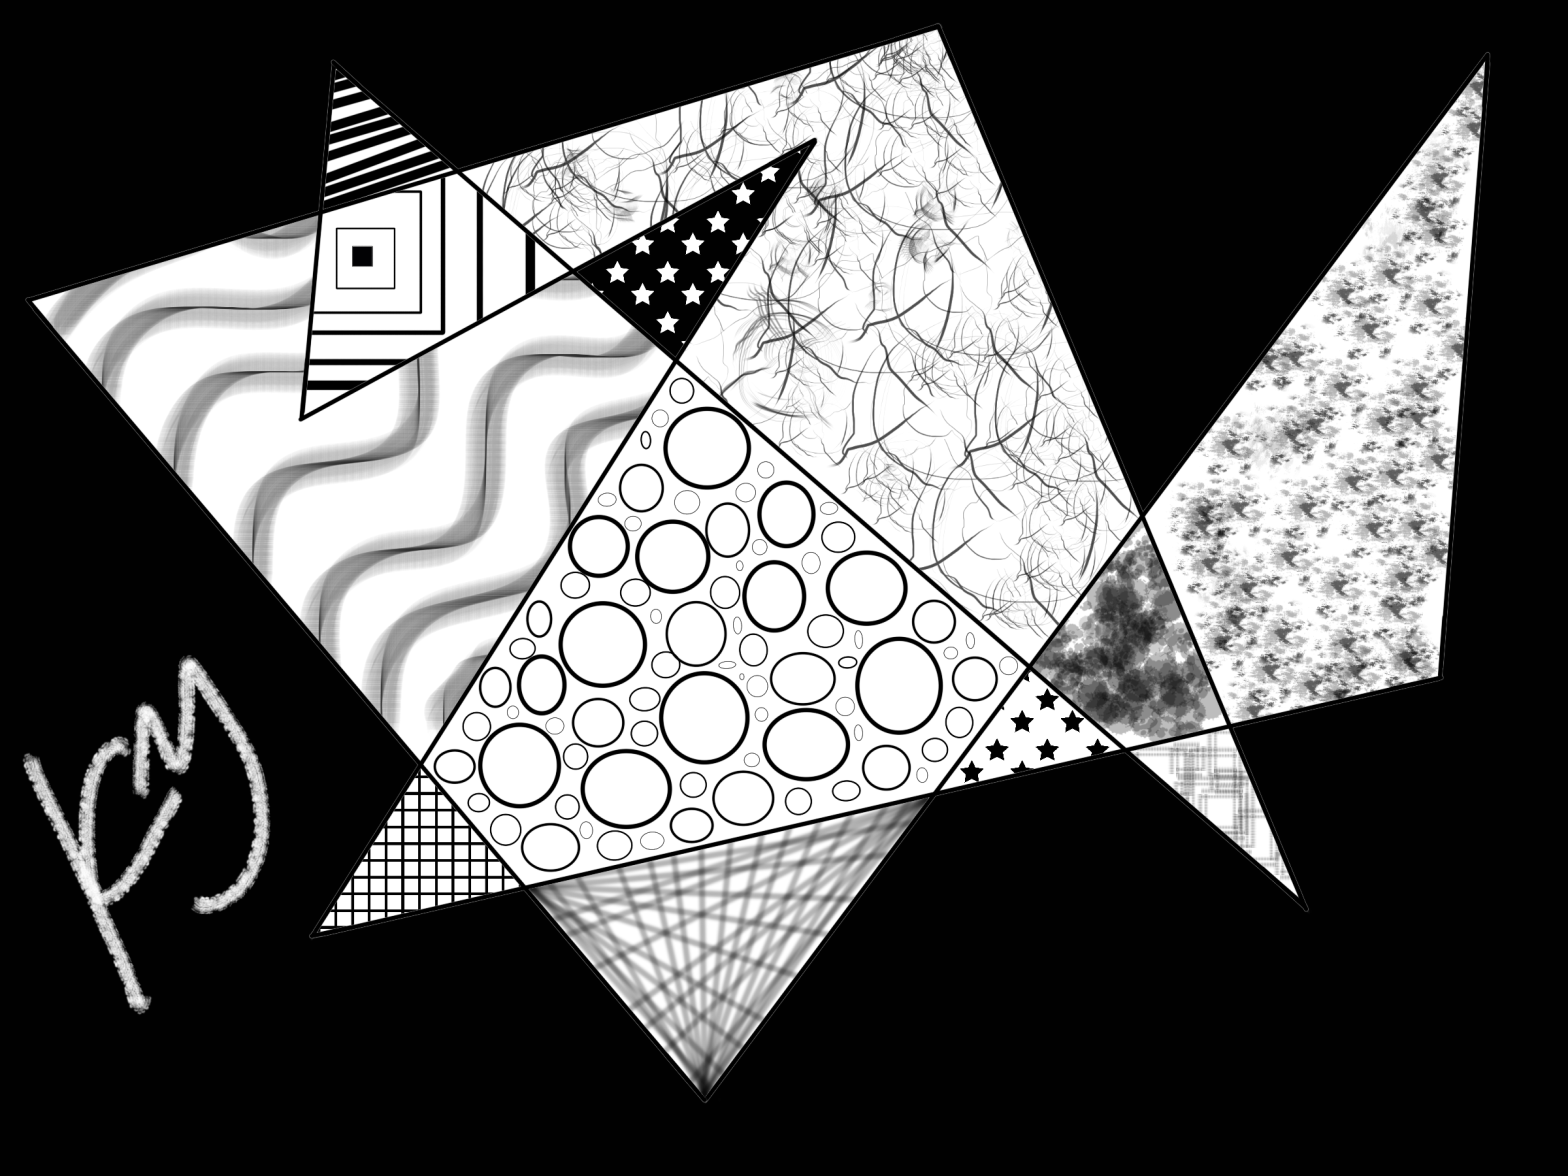 Abstract black and white digital art in the signature style of Kate matarese with various patterns and textures in an angular scribbled frame